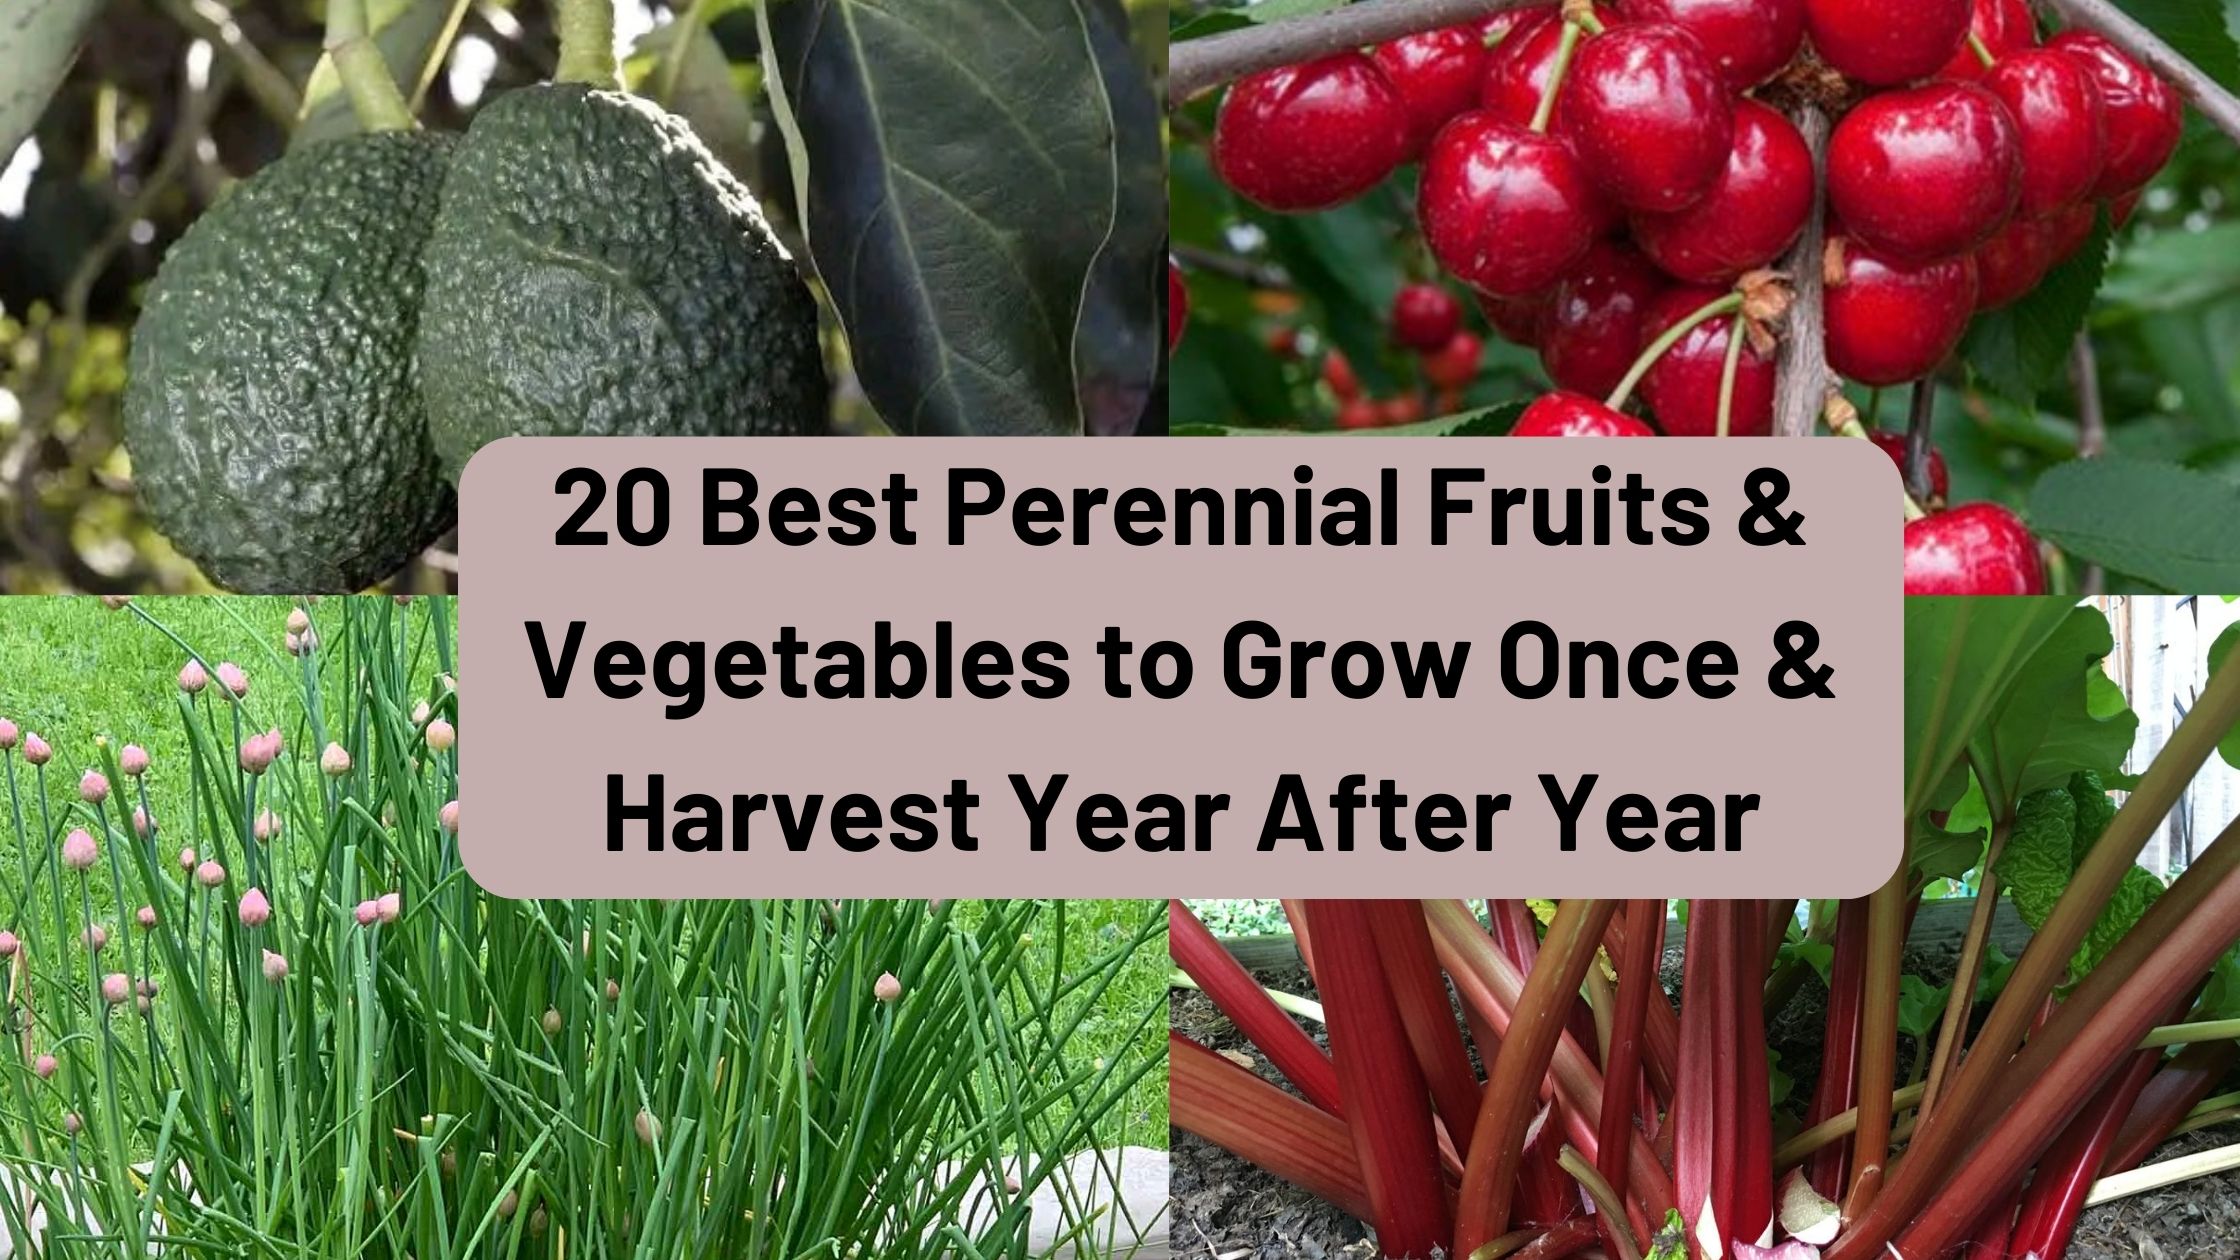 Perennial Fruits and Vegetables to Grow Once and Harvest Year After Year